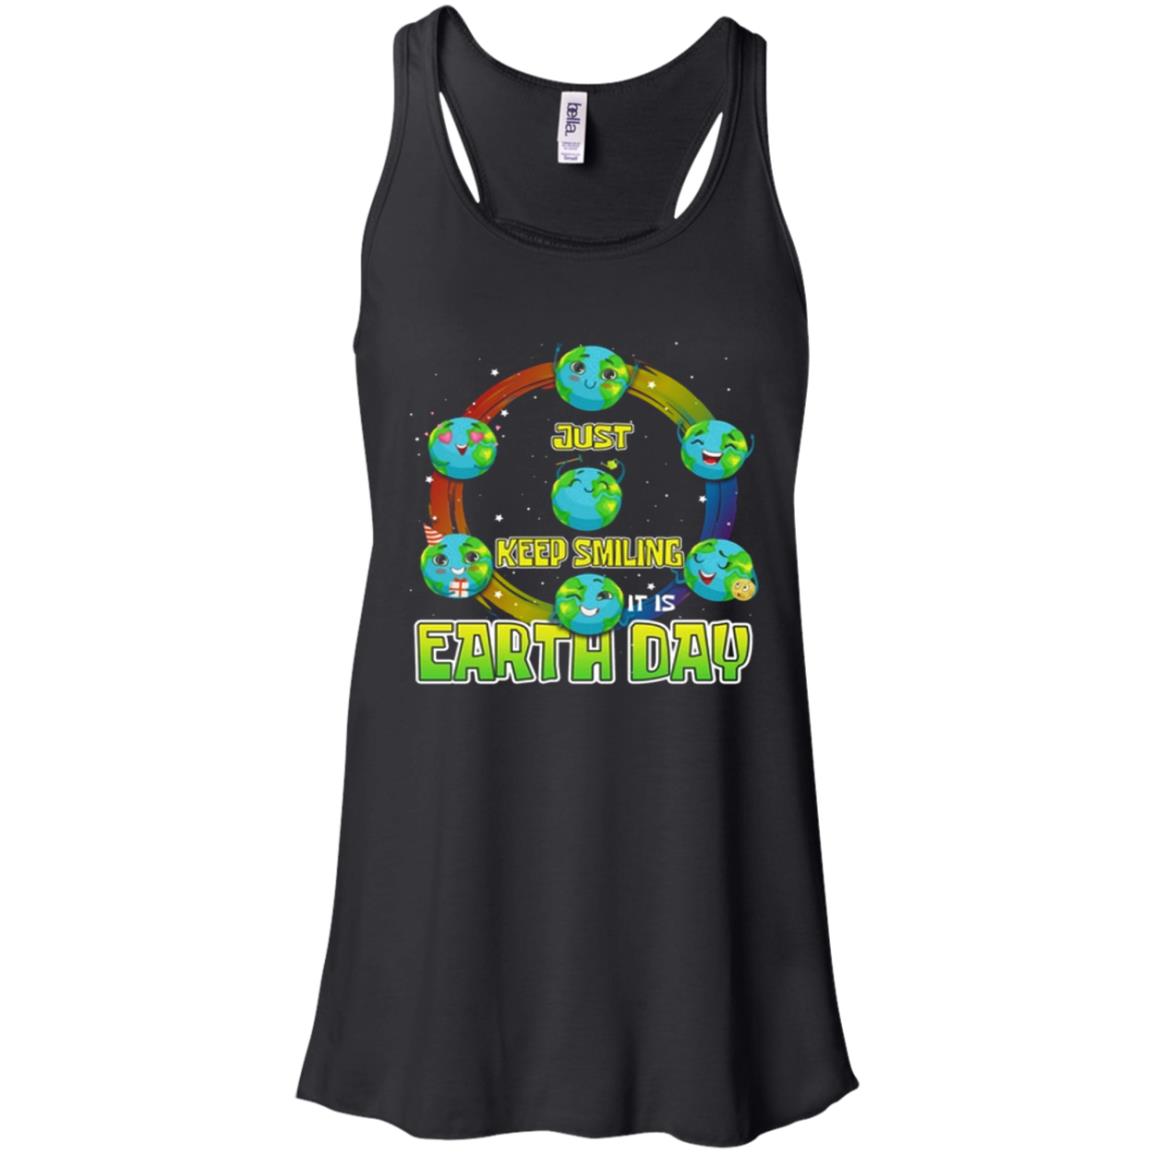 Just Keep Smiling Earth Day Trending Racerback Tank Shirts